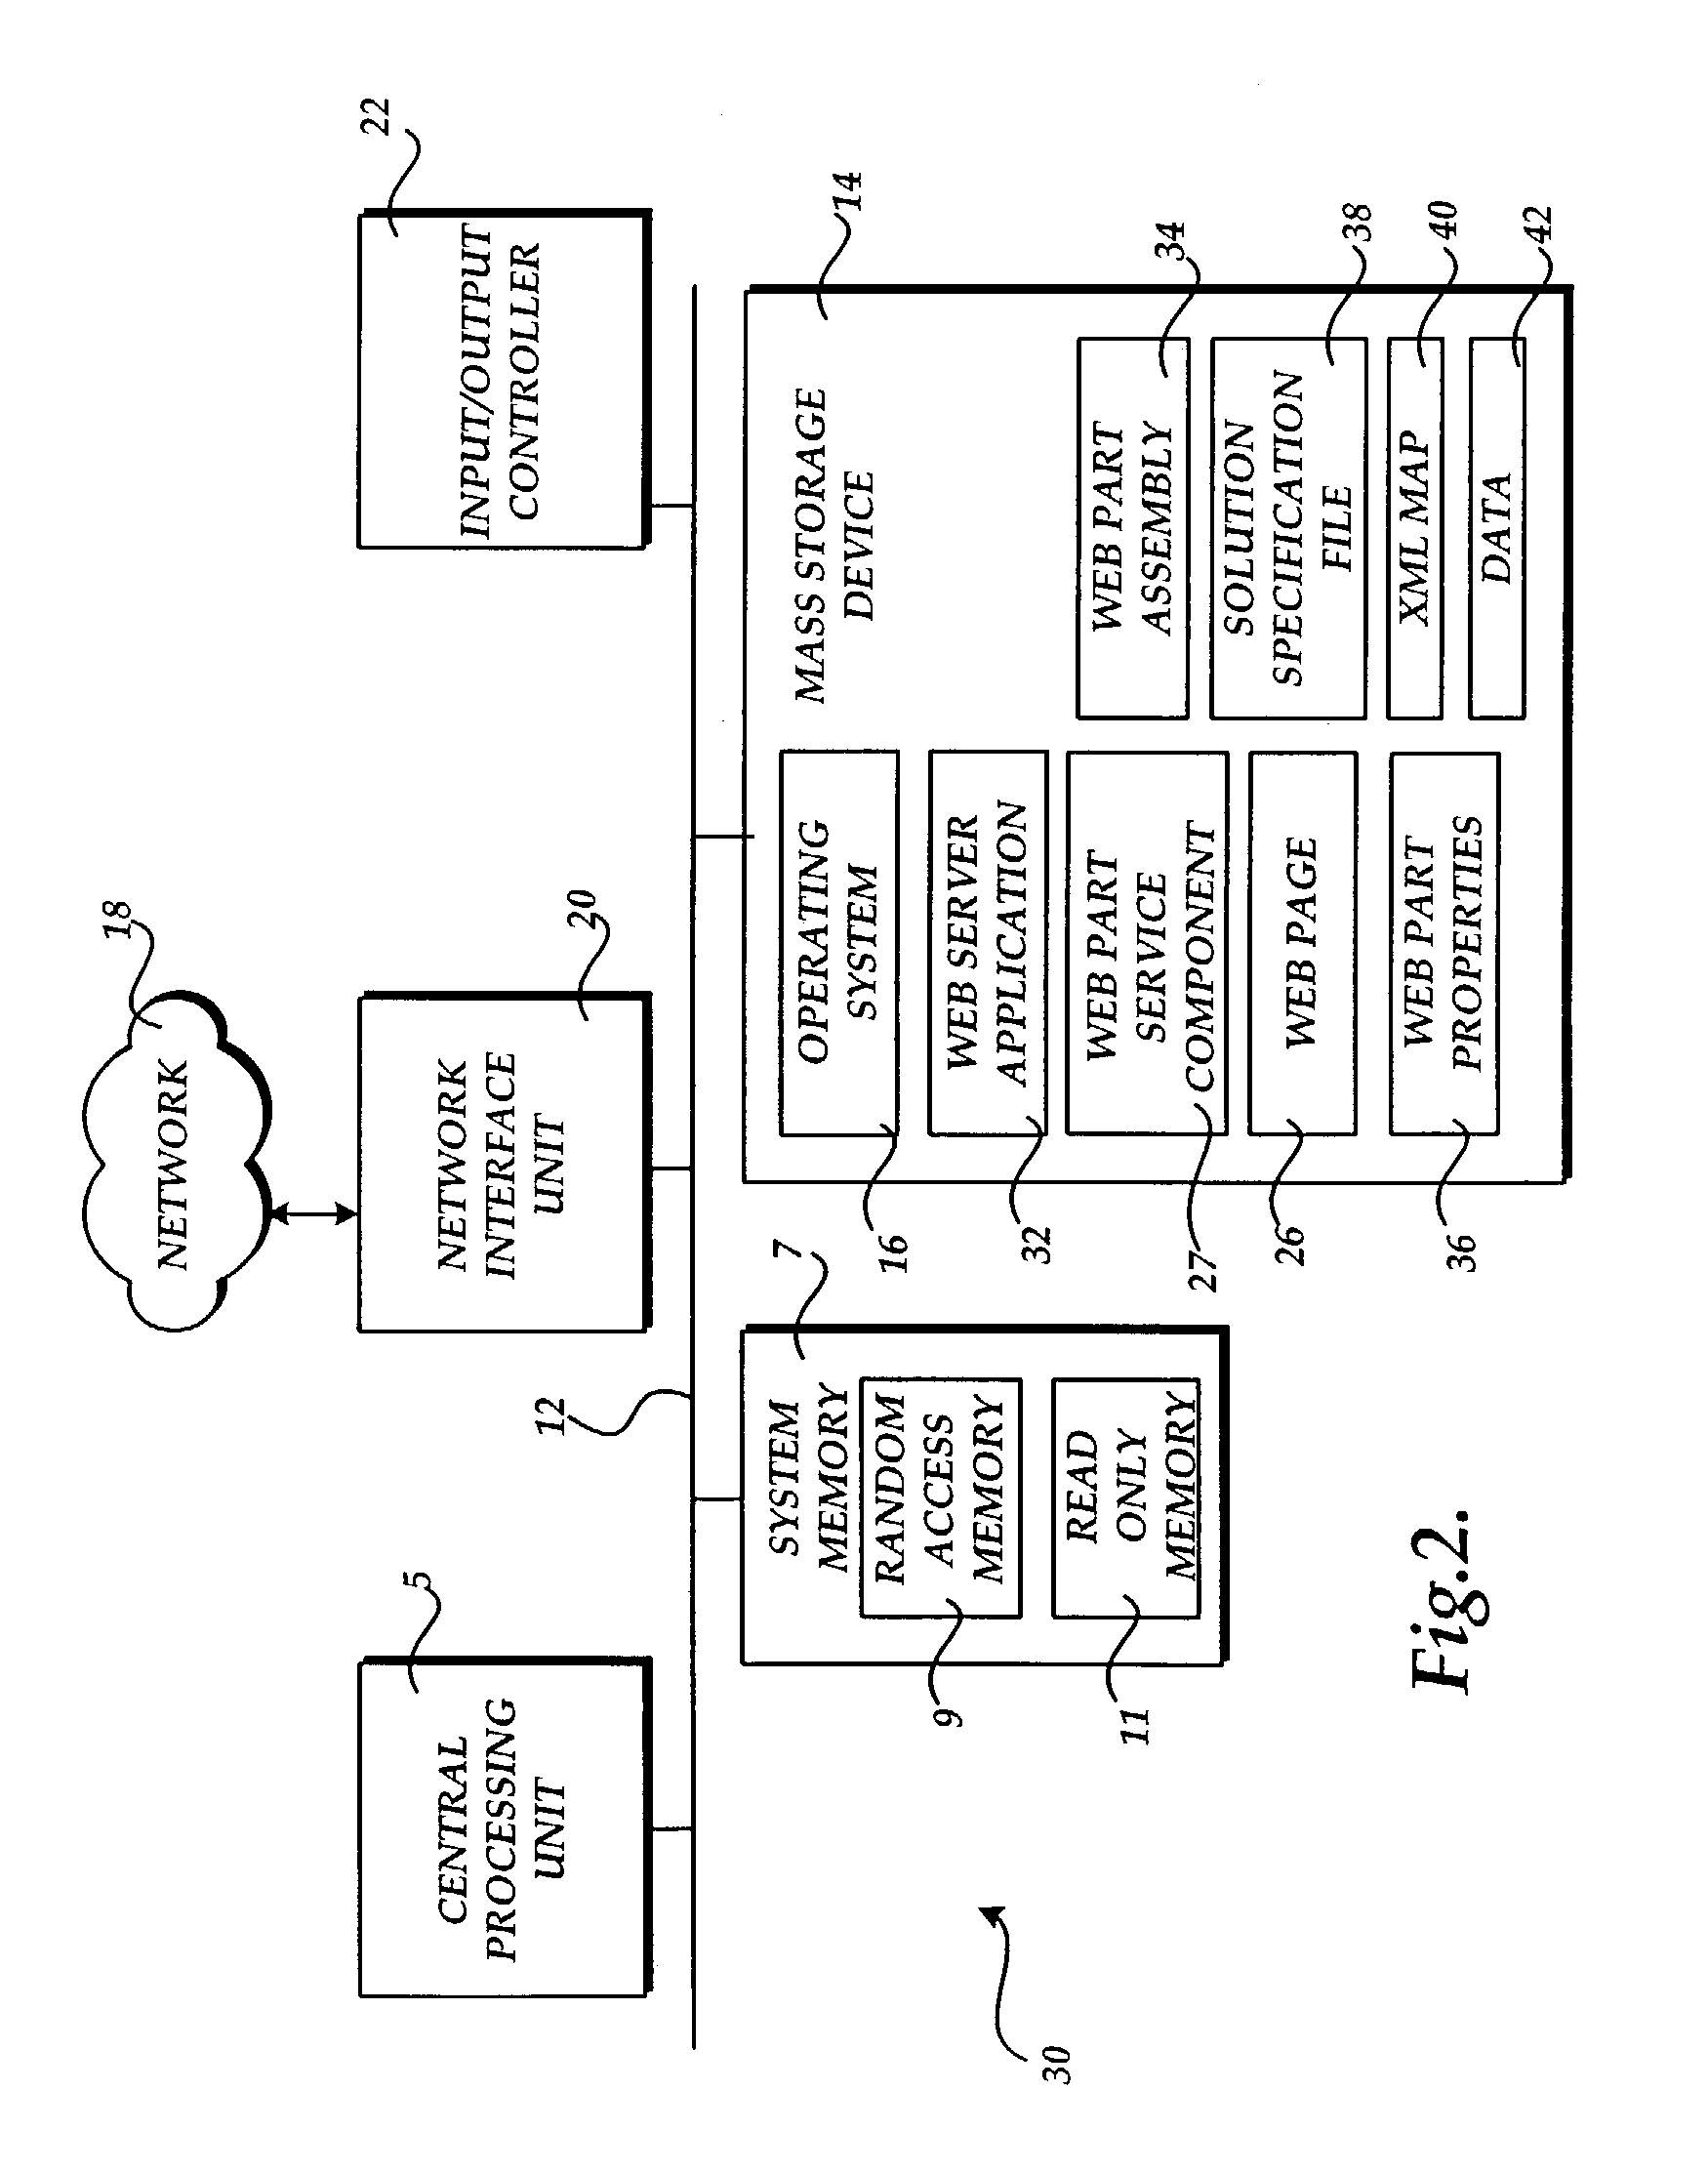 Method, system, and apparatus for implementing object interfaces at runtime